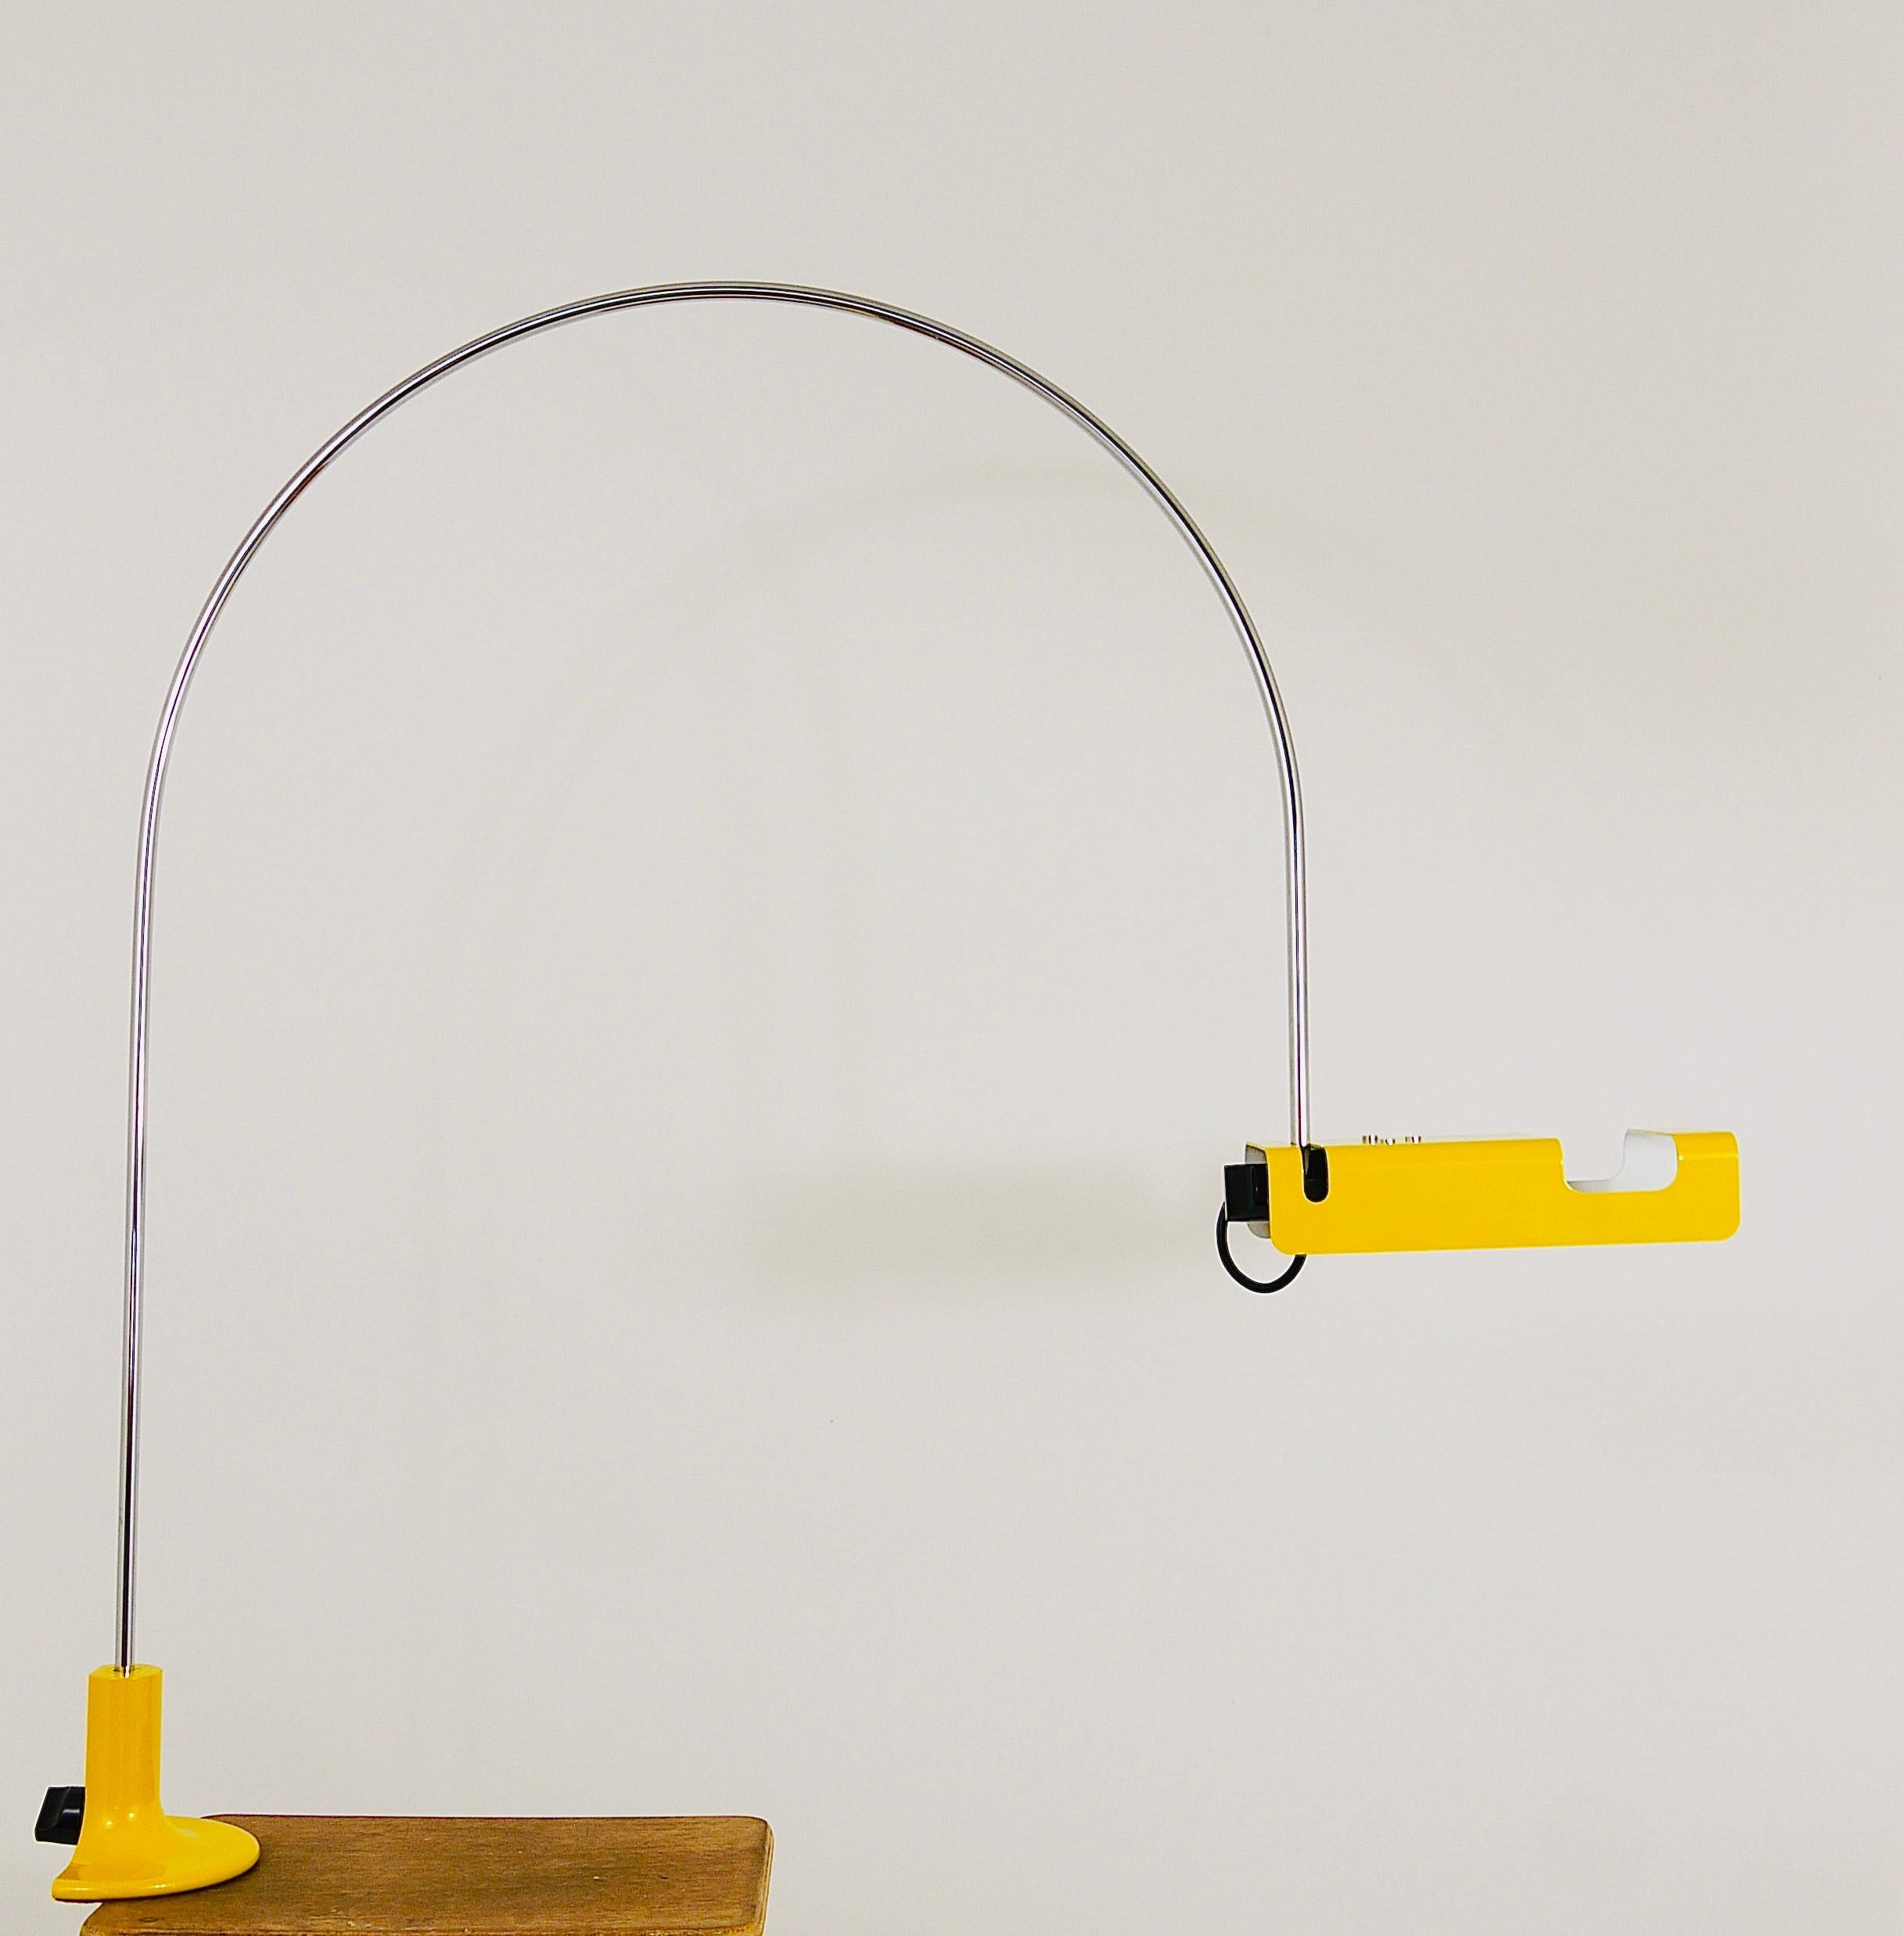 A Minimalist sculptural Mid-Century Modern desk or table lamp from the 1960s. Designed by Joe Colombo for Oluce, Italy. An early model with the “1967” label inside the lampshade. Height-adjustable and rotatable with a tiltable and rotatable shade on